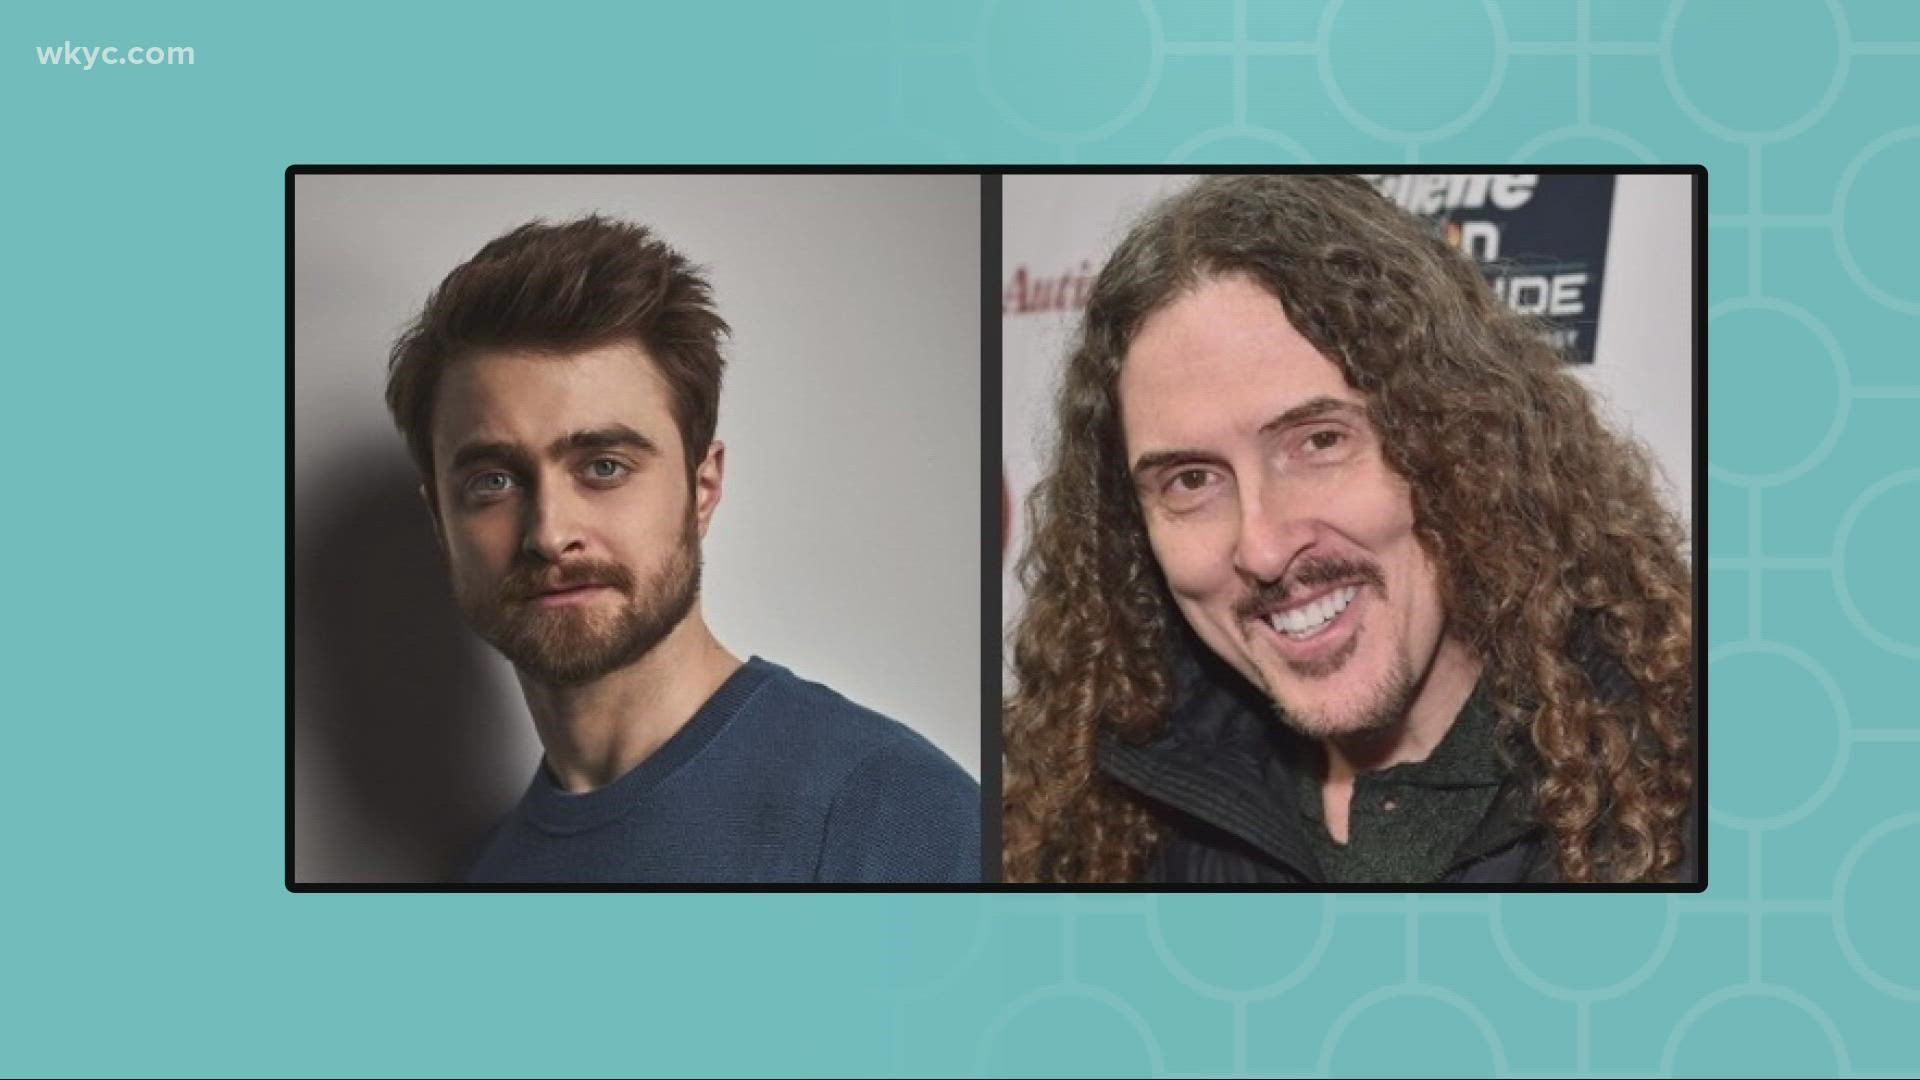 And from Harry Potter to Grammy award winning musician. Daniel Radcliffe is Weird Al Yankovic.